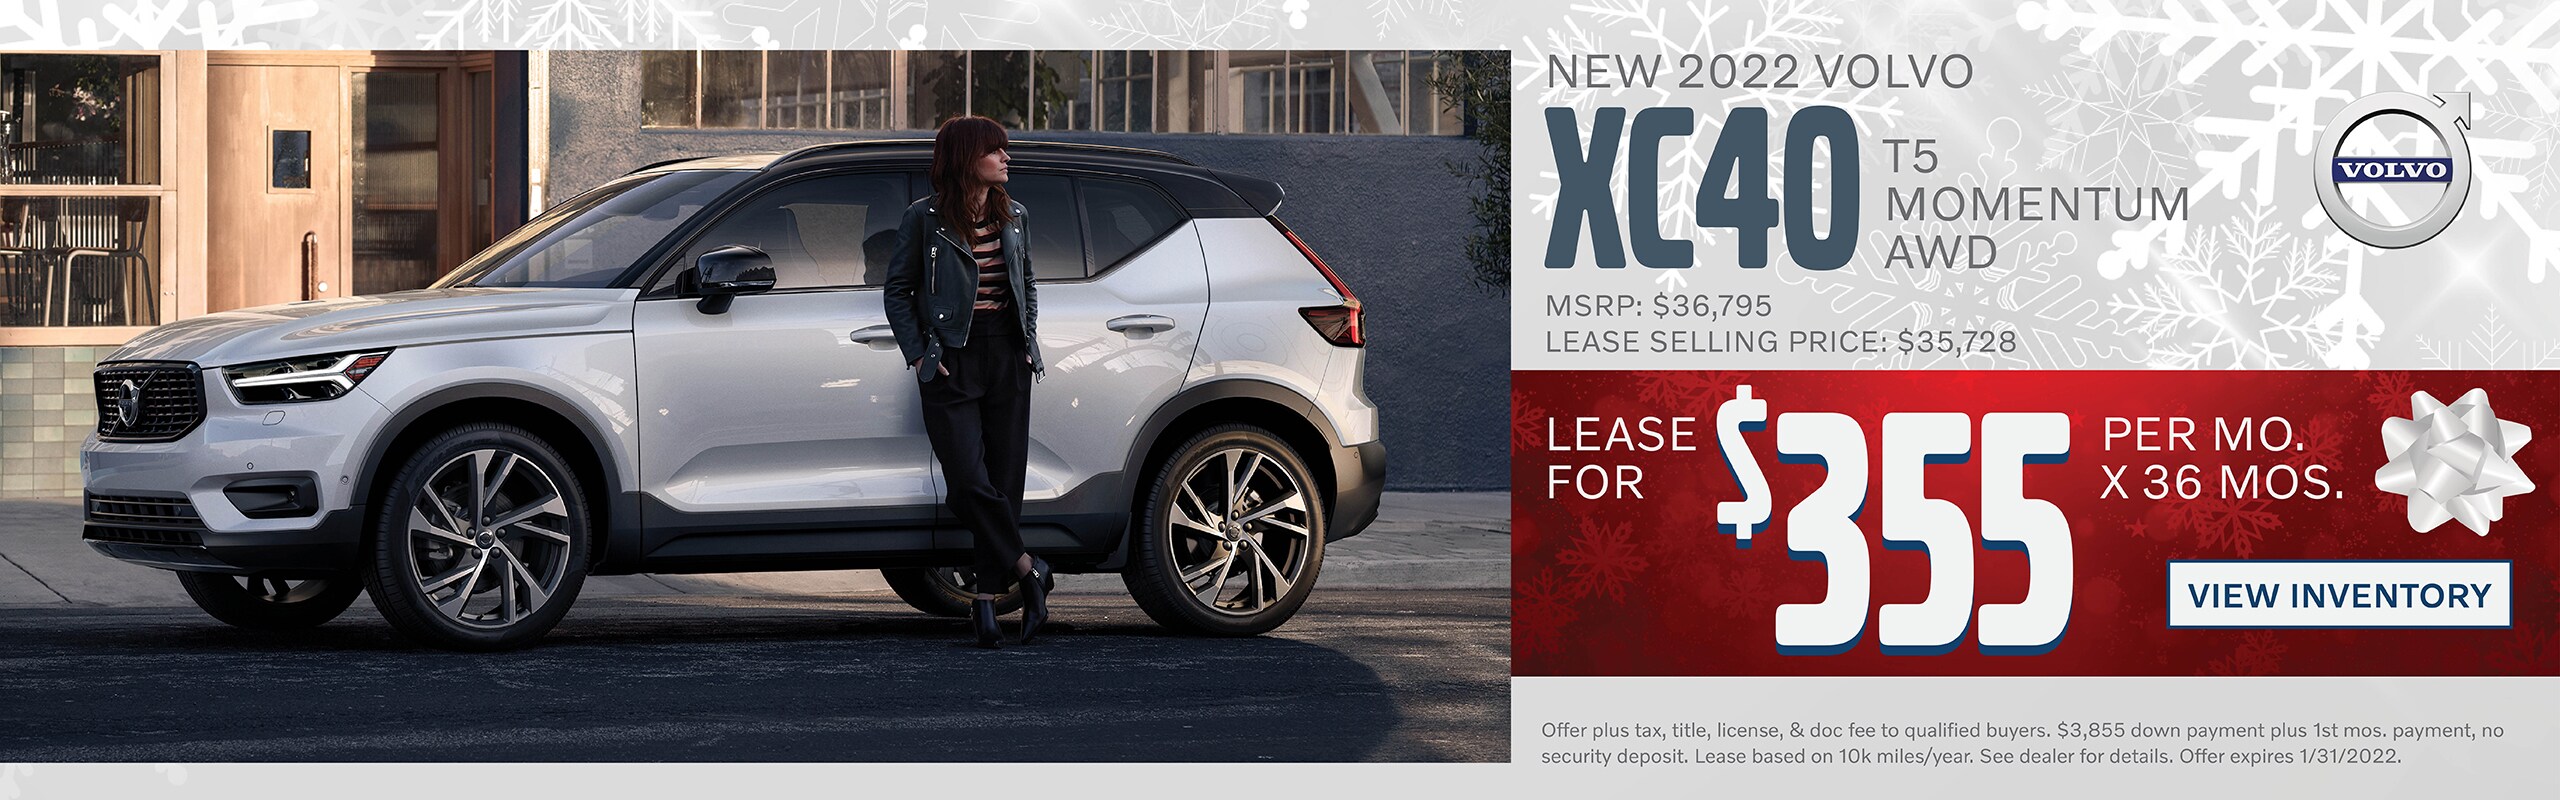 Lease a new 2022 Volvo XC40 T5 Momentum AWD for $355 per month for 36 months - MSRP $36,795 - Lease $35,728